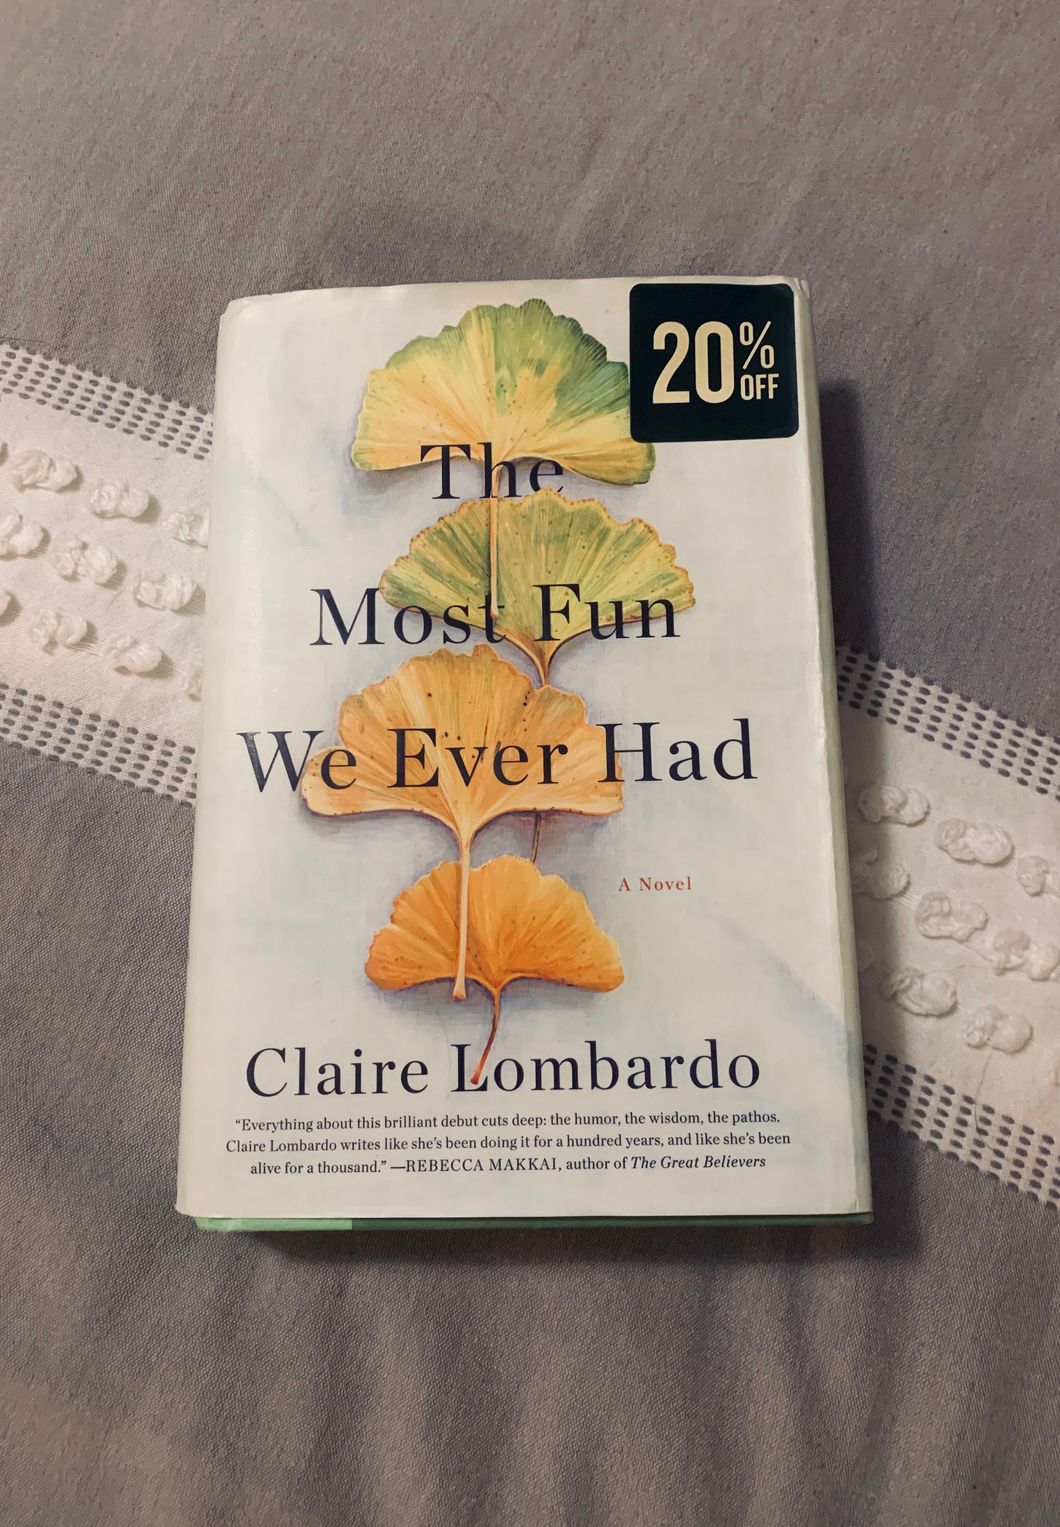 My Review Of Claire Lombardo's 'The Most Fun We Ever Had'